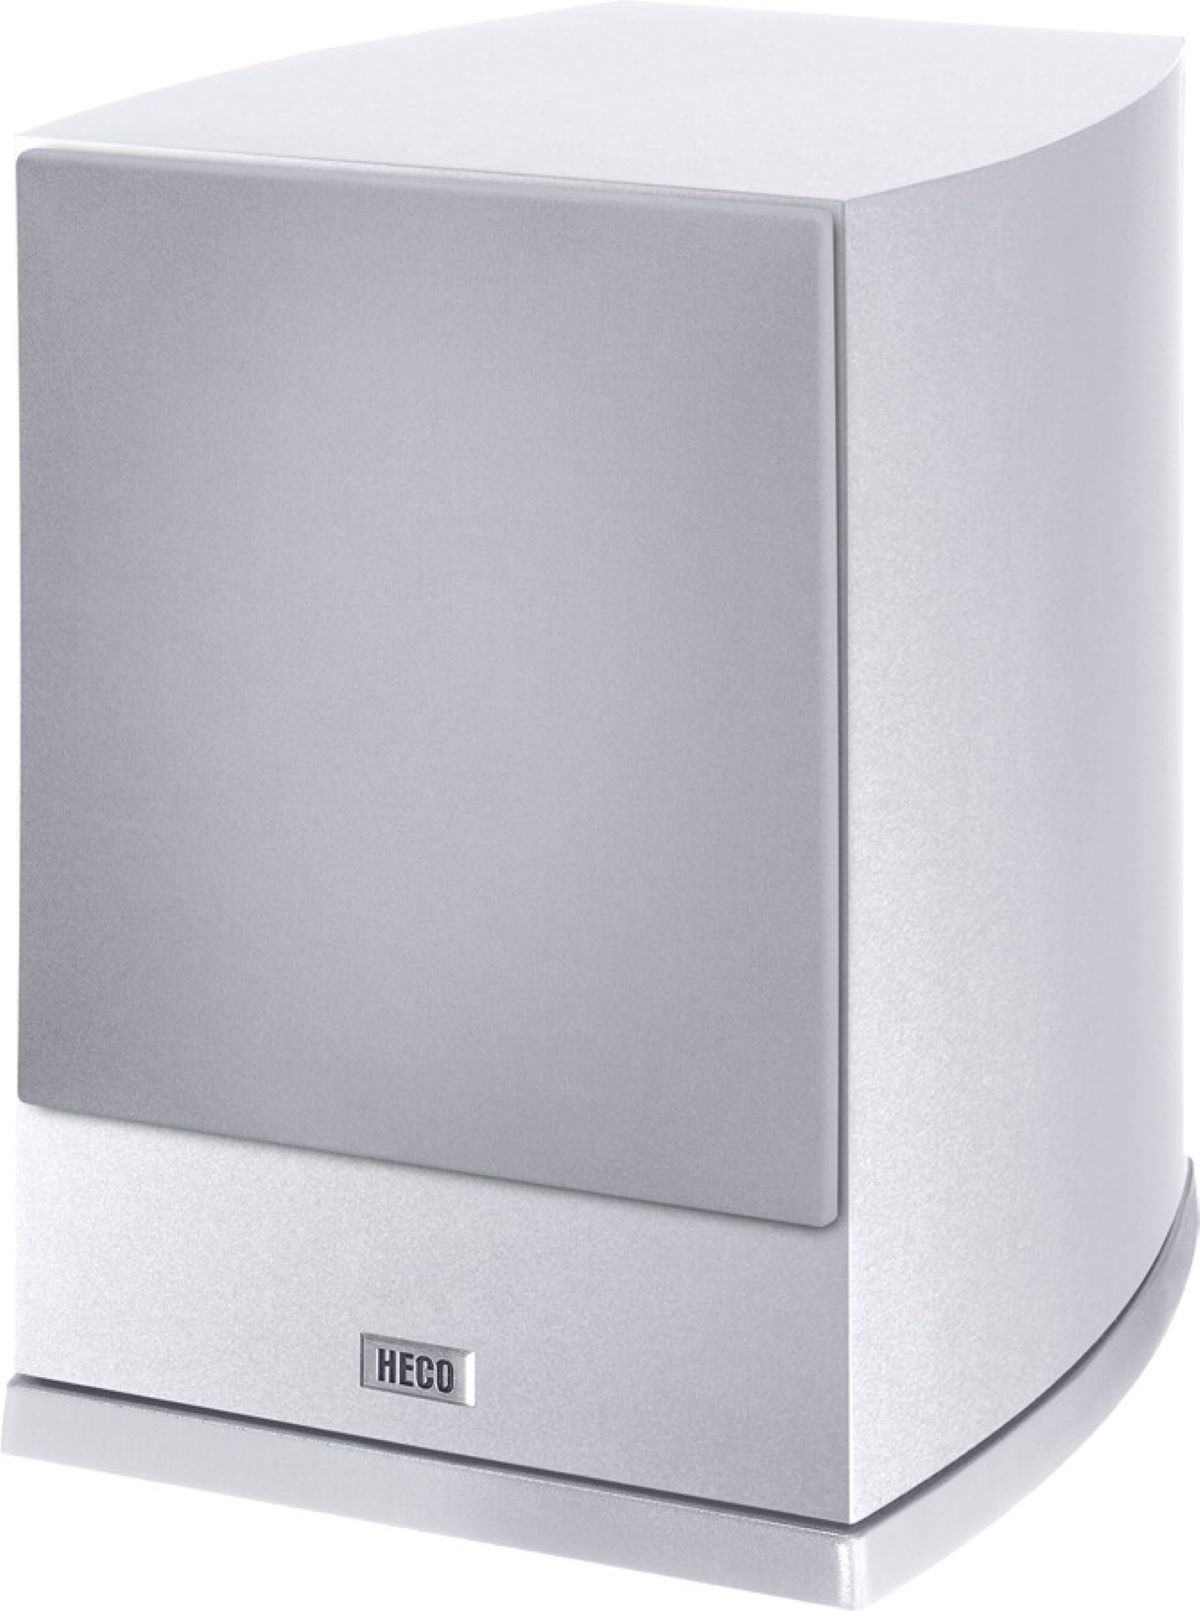 HECO VICTA ELITE Subwoofer, SUB weiss 252A